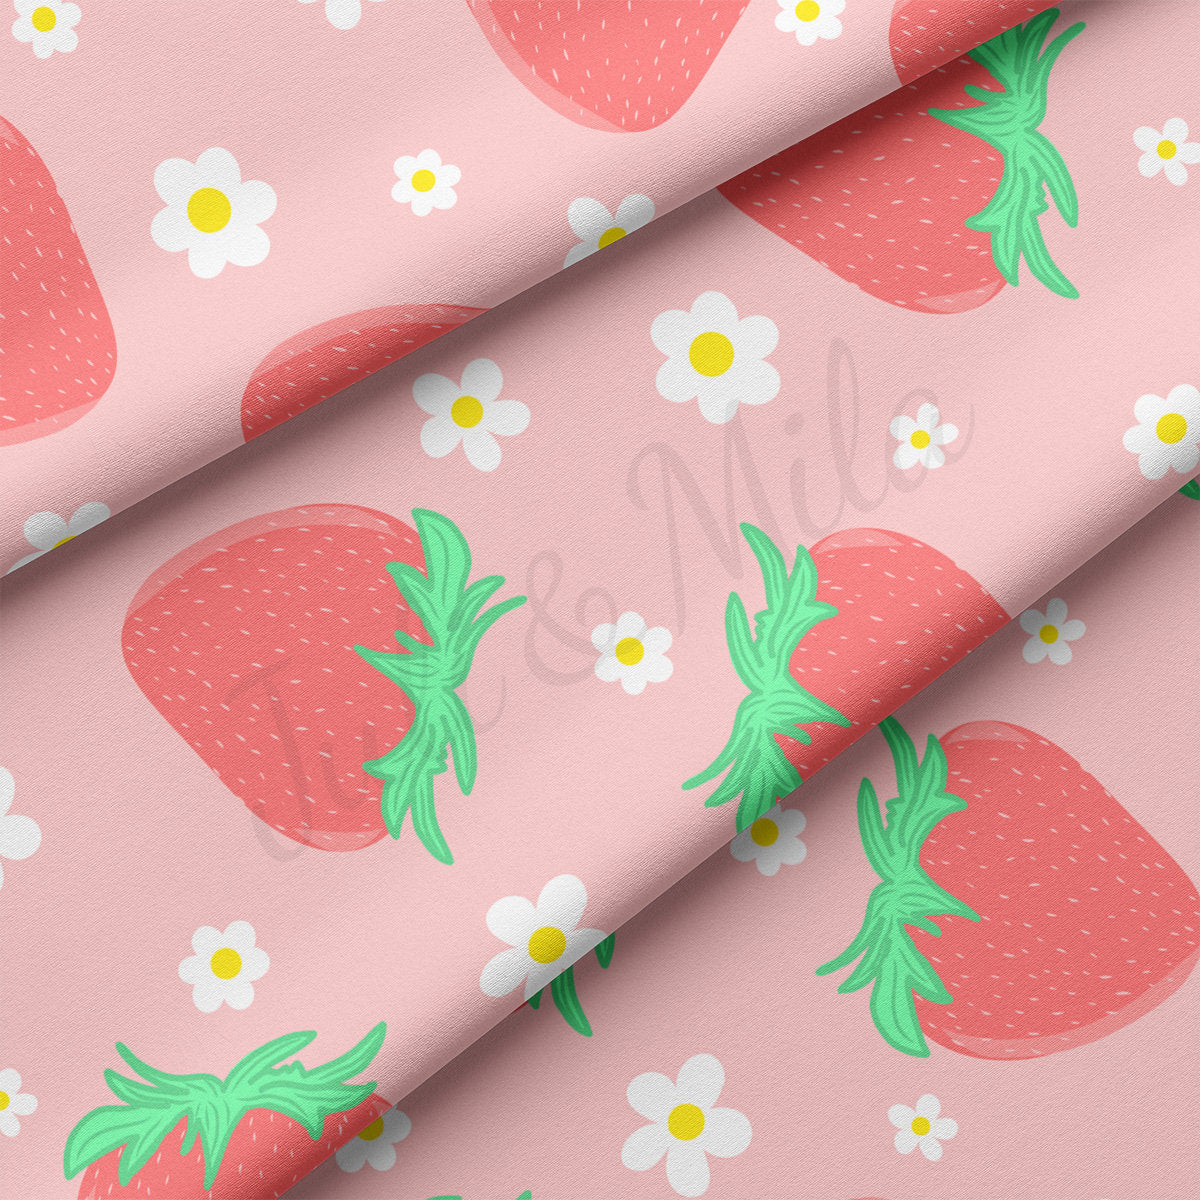 DBP Fabric Double Brushed Polyester DBP2727 Strawberry